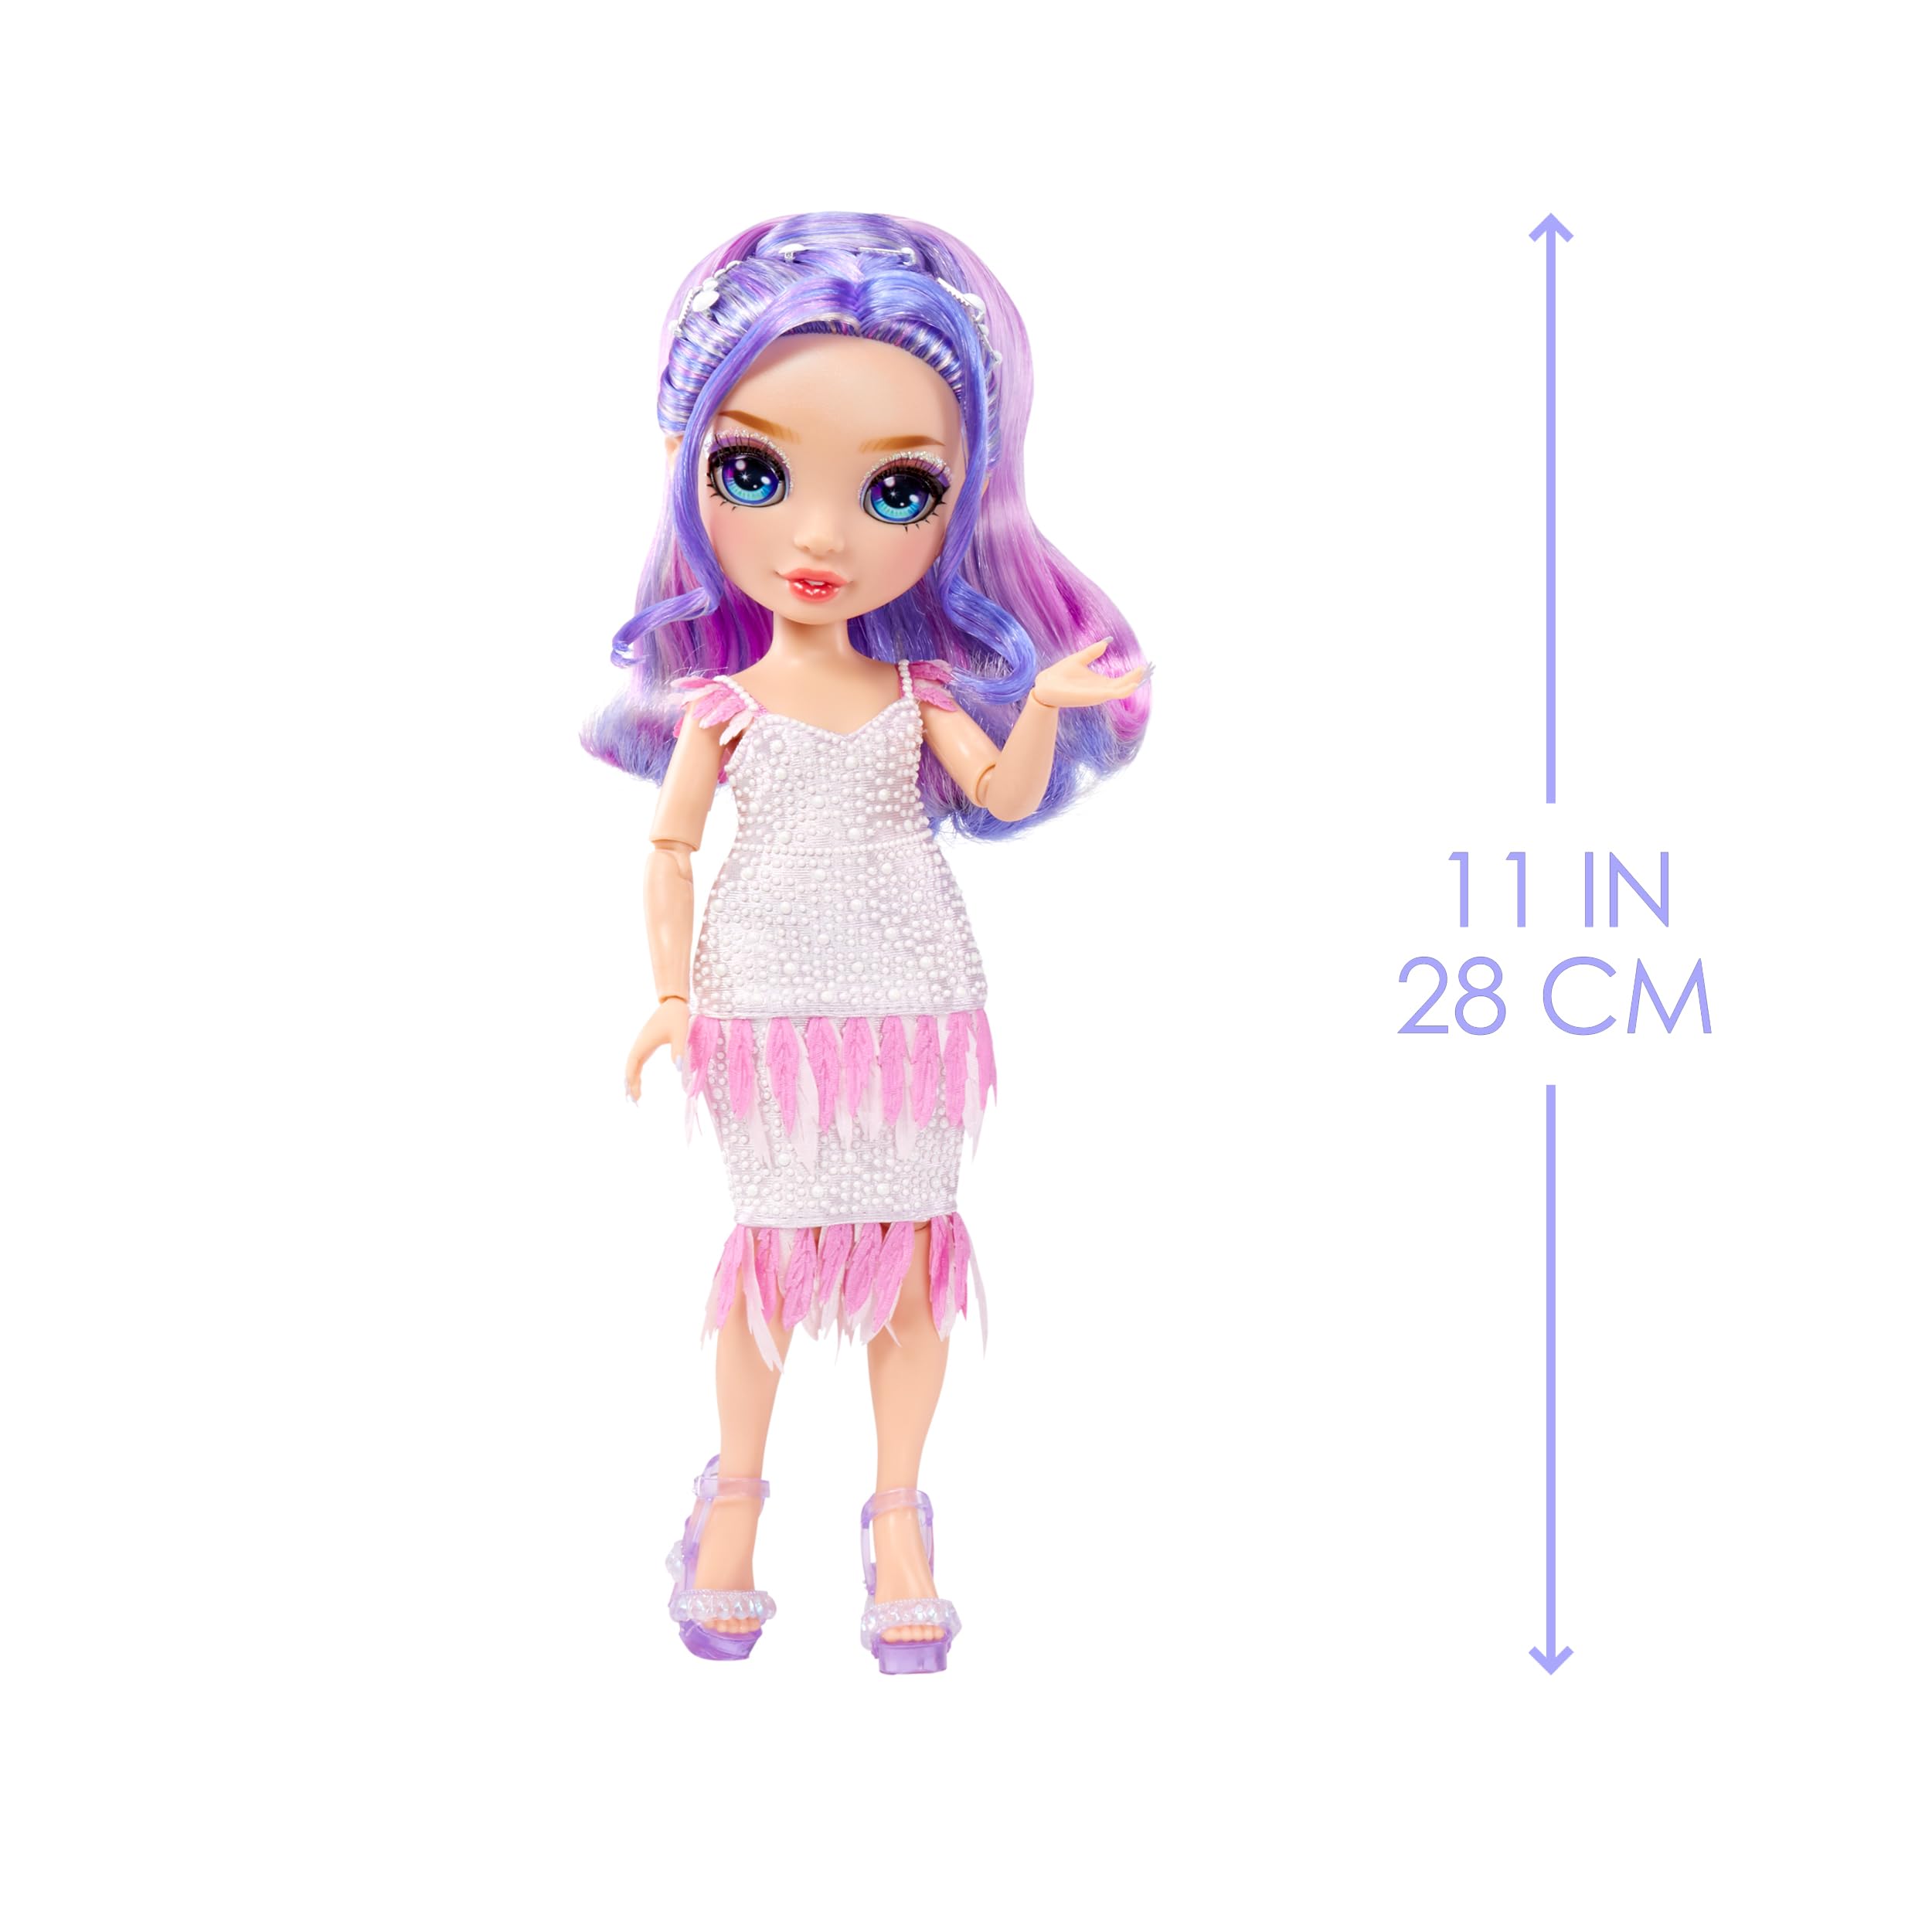 Rainbow High Fantastic Fashion Violet Willow - Purple 11” Fashion Doll and Playset with 2 Complete Doll Outfits, and Fashion Play Accessories, Great Gift for Kids 4-12 Years Old